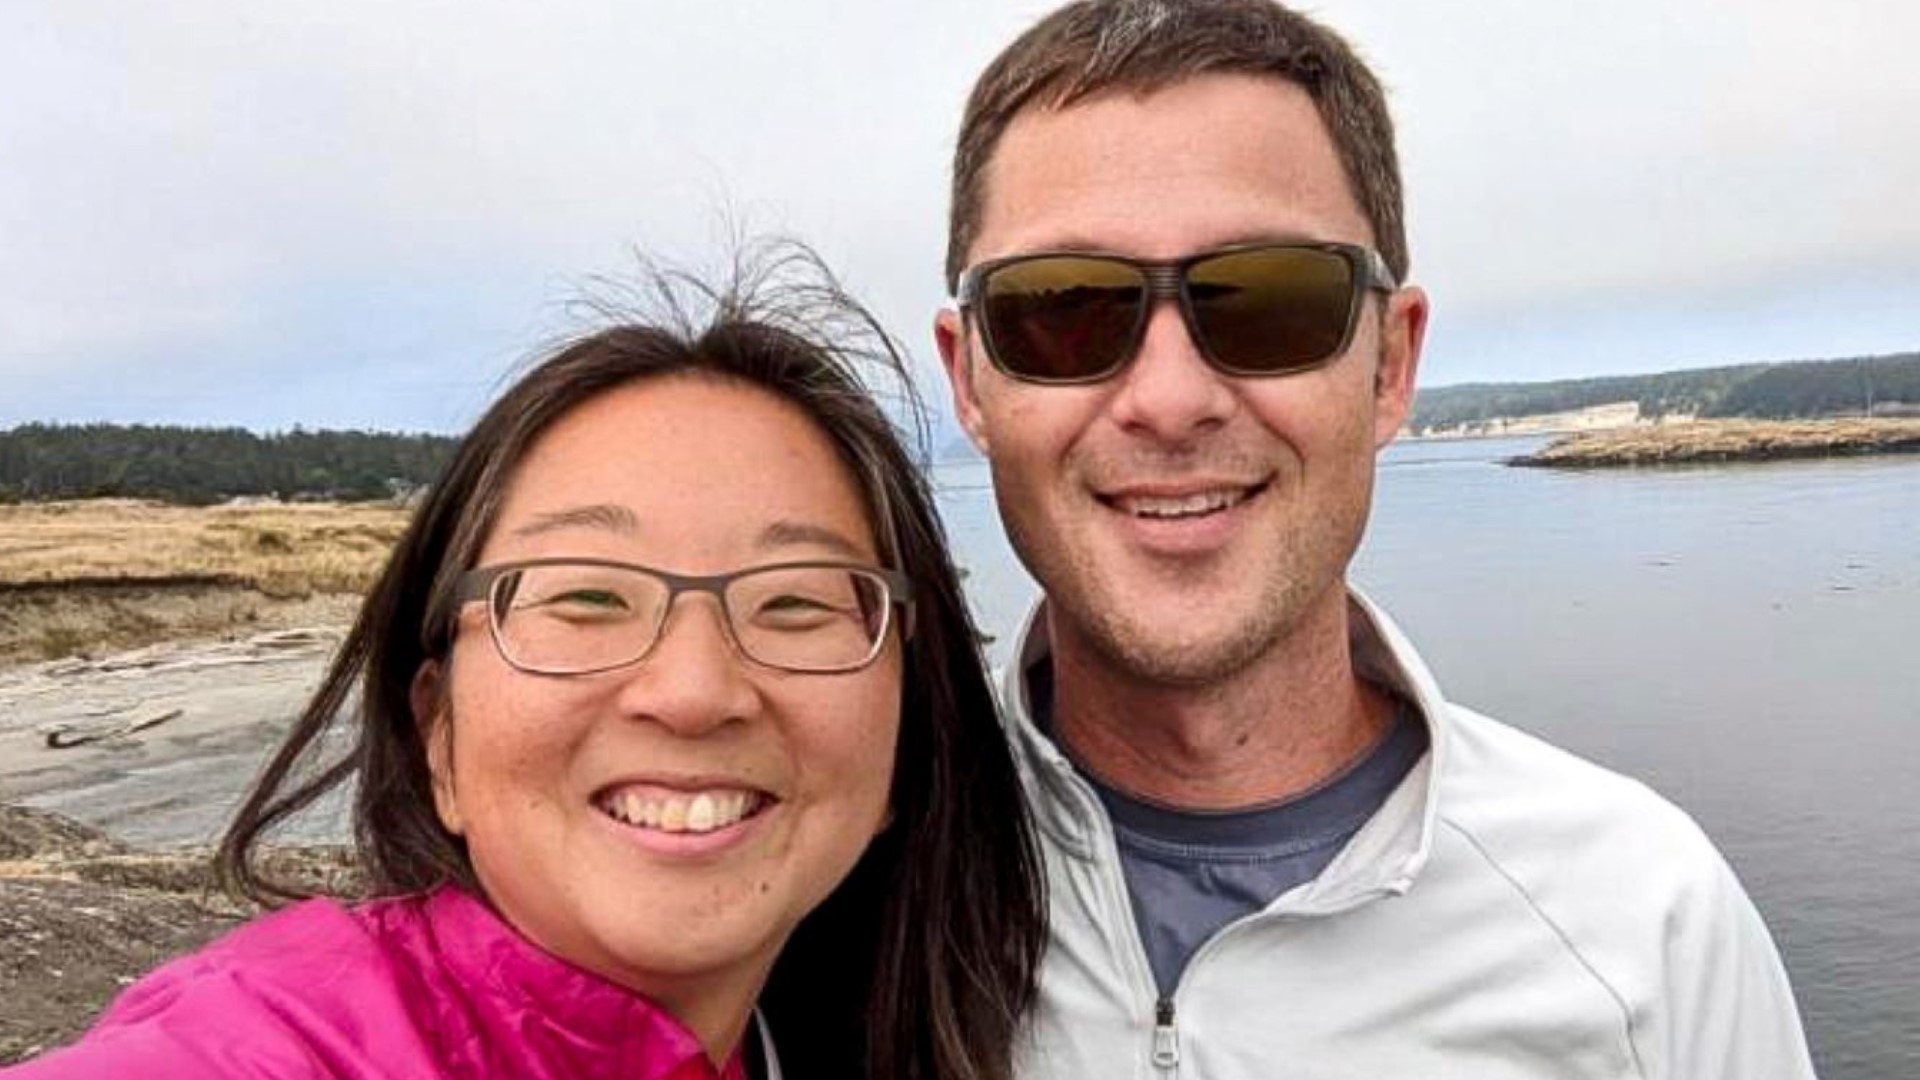 The Coast Guard says Luke and Rebecca Ludwig were among 10 people aboard the plane that crashed Sunday near Whidbey Island.